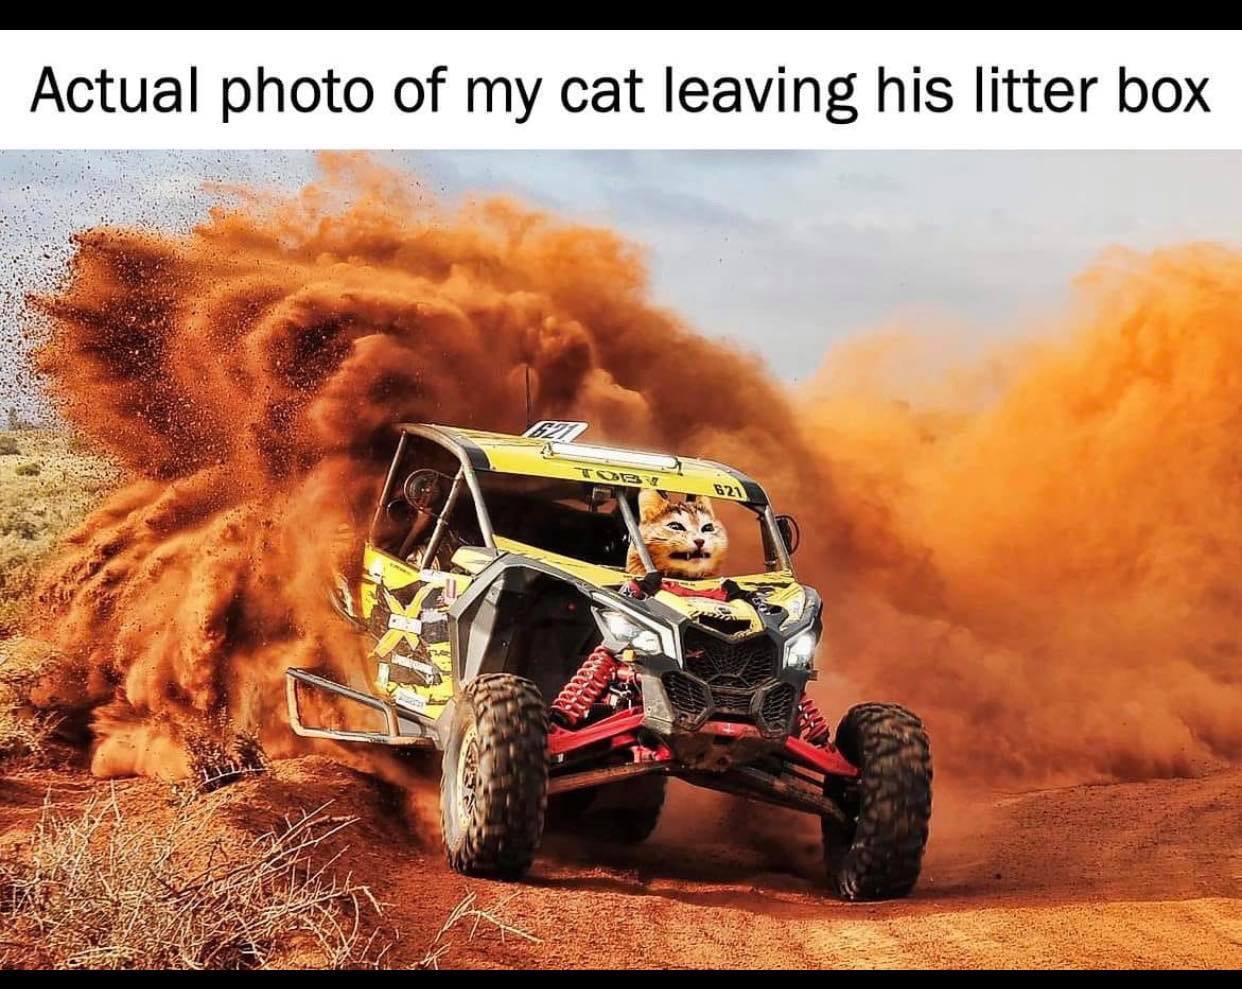 my cat leaves the litter box - Actual photo of my cat leaving his litter box 621